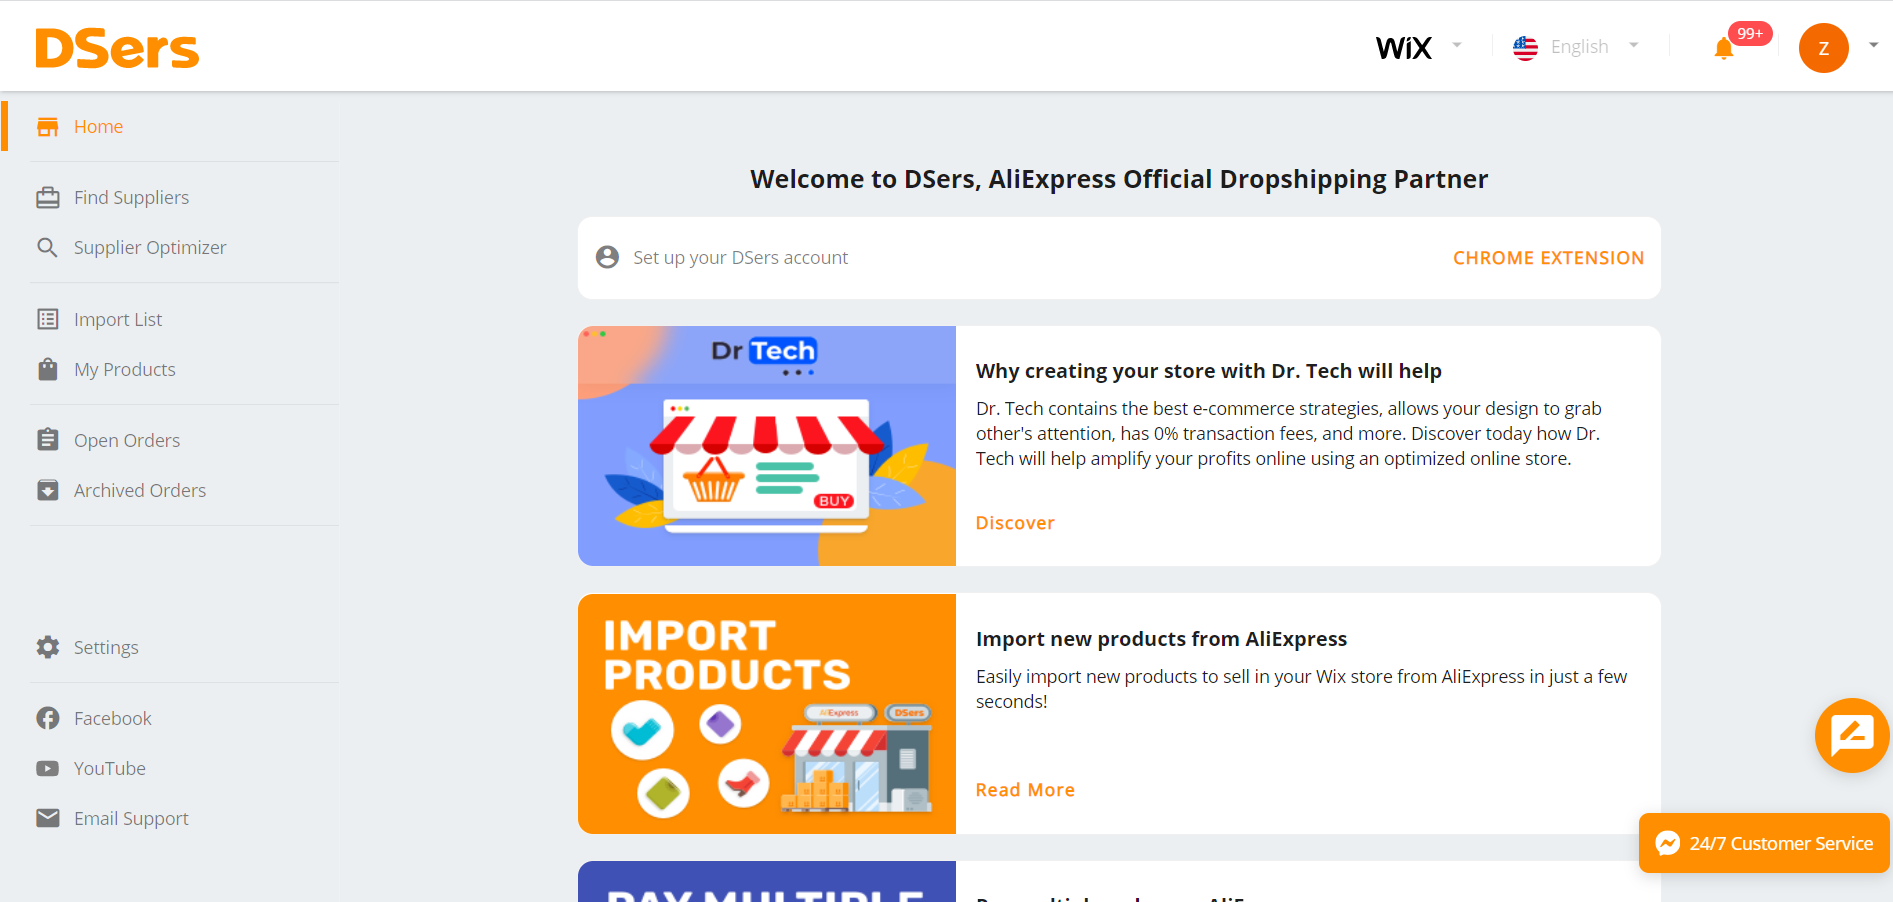 Link your Wix store - AliExpress login page - Wix DSers  